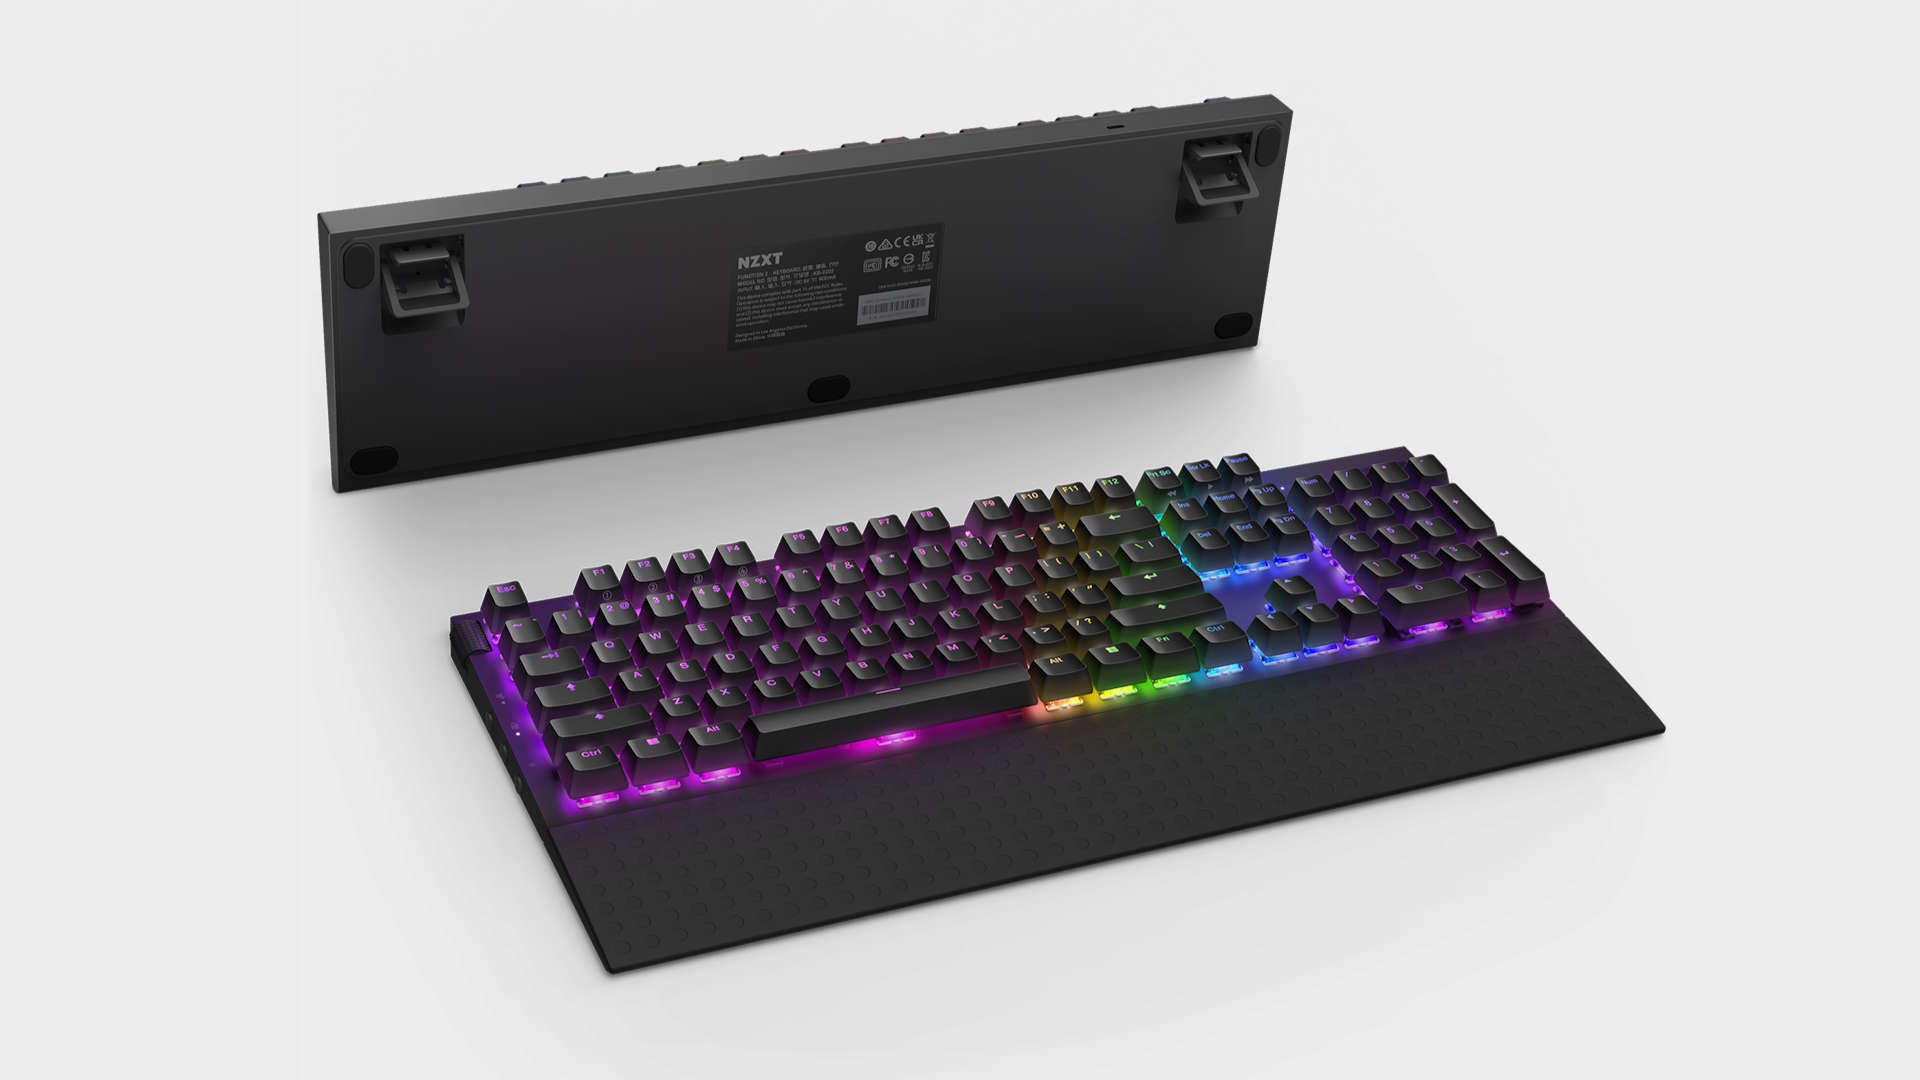 NZXT Function 2 gaming keyboard